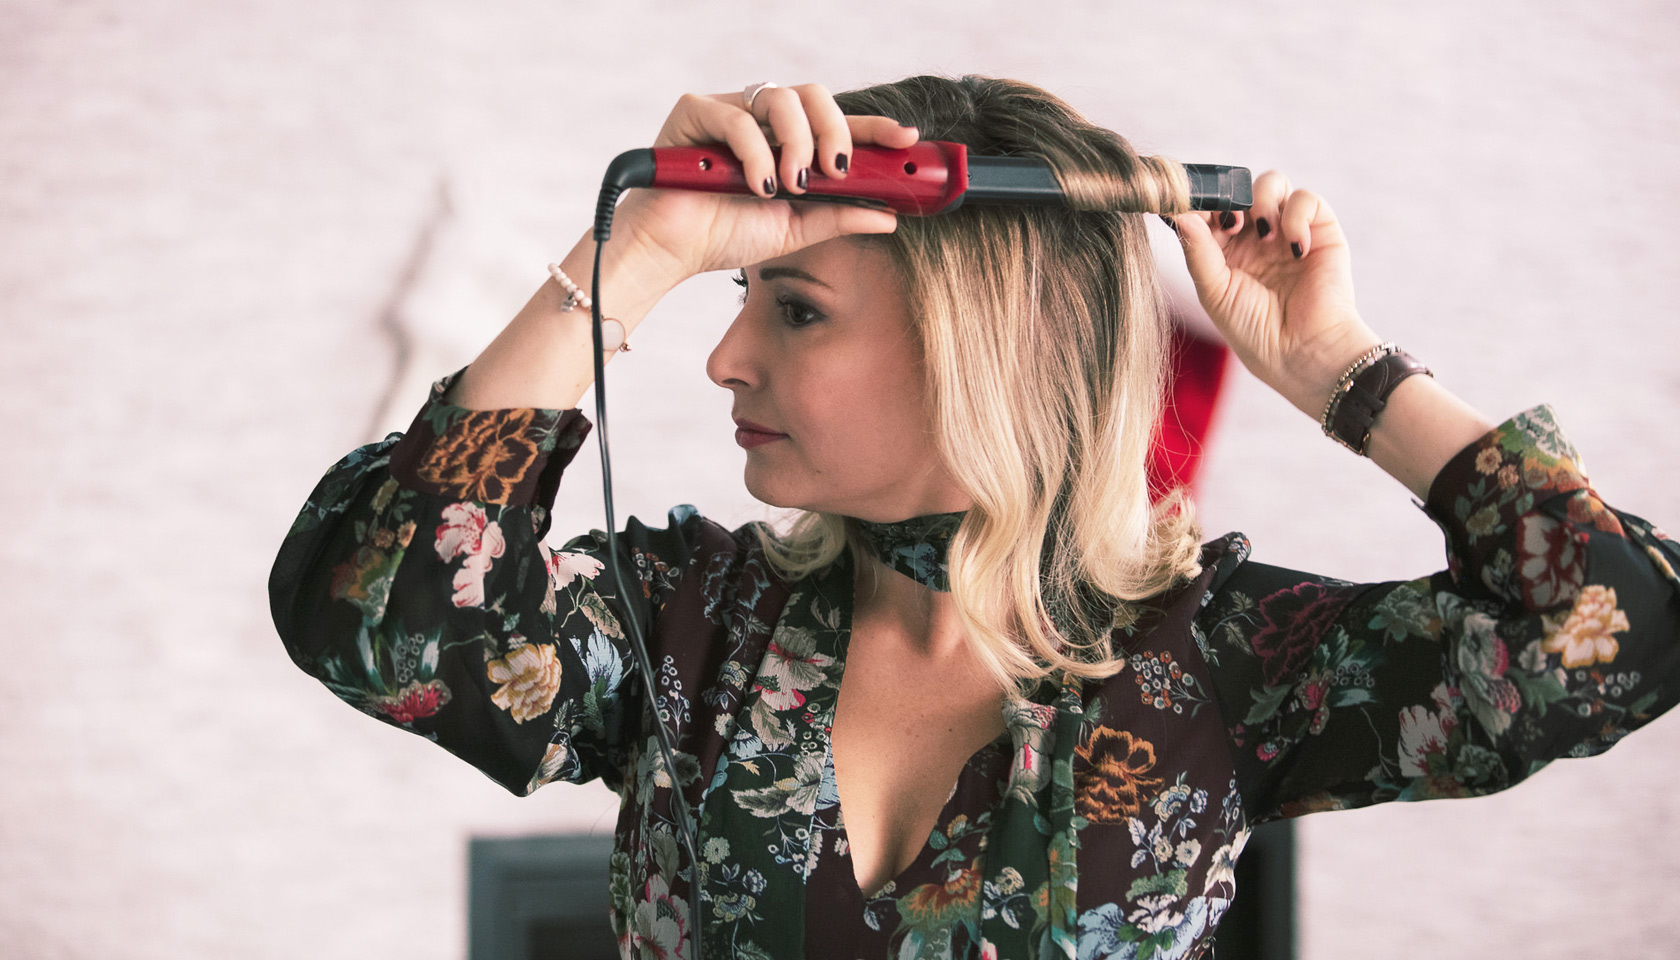 3 holiday hairstyles